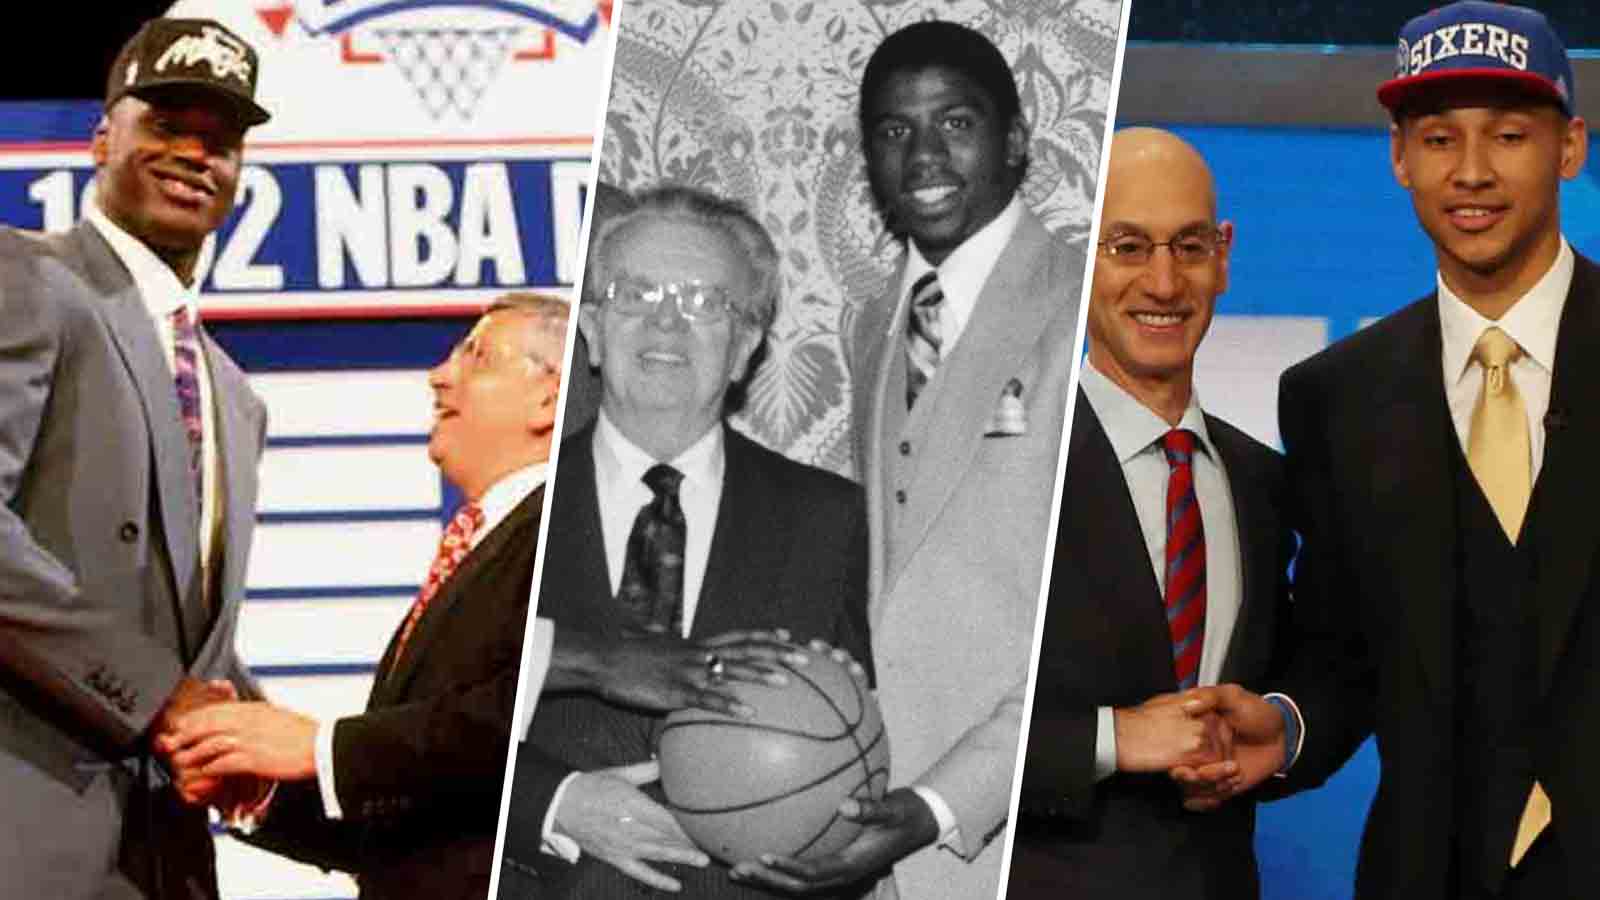 Top 10 Draft Picks From The 2003 NBA Draft: Where Are They Now